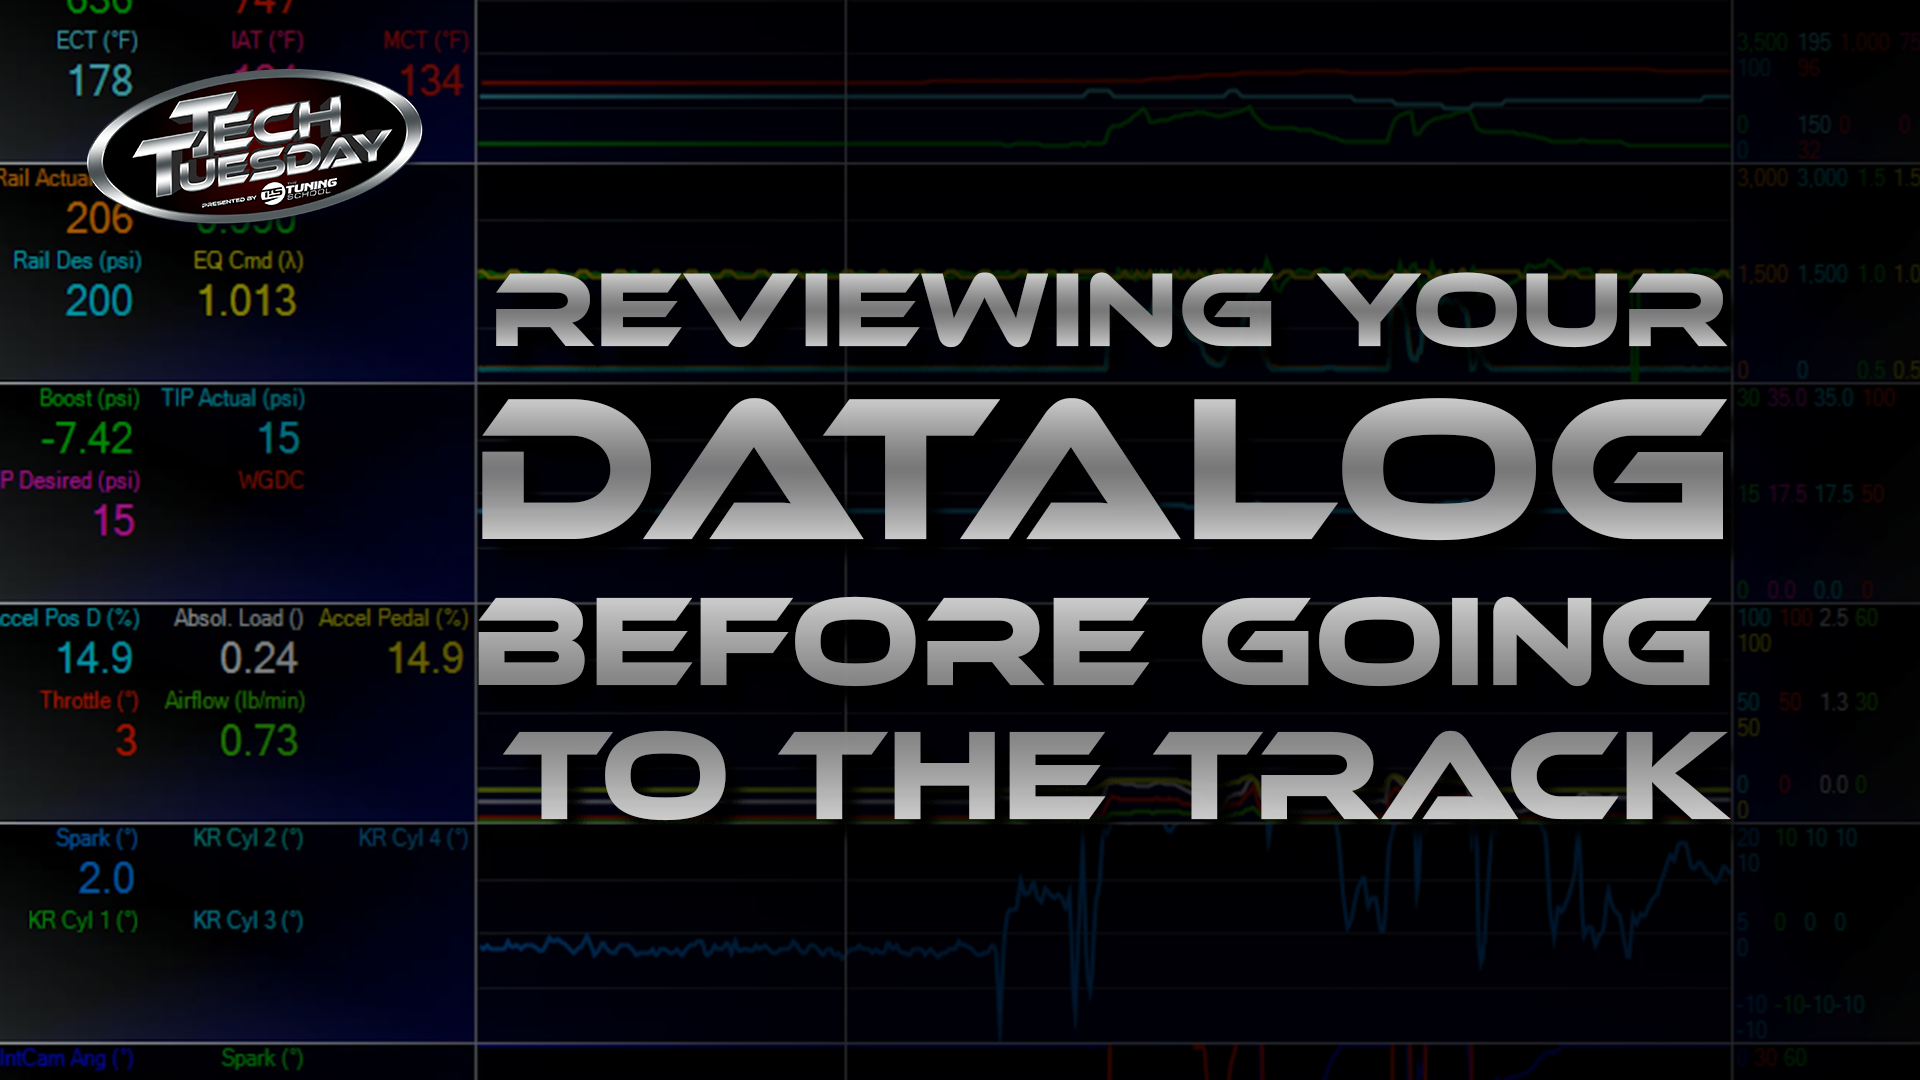 Reviewing Your Datalog Before Going to the Track with HP Tuners